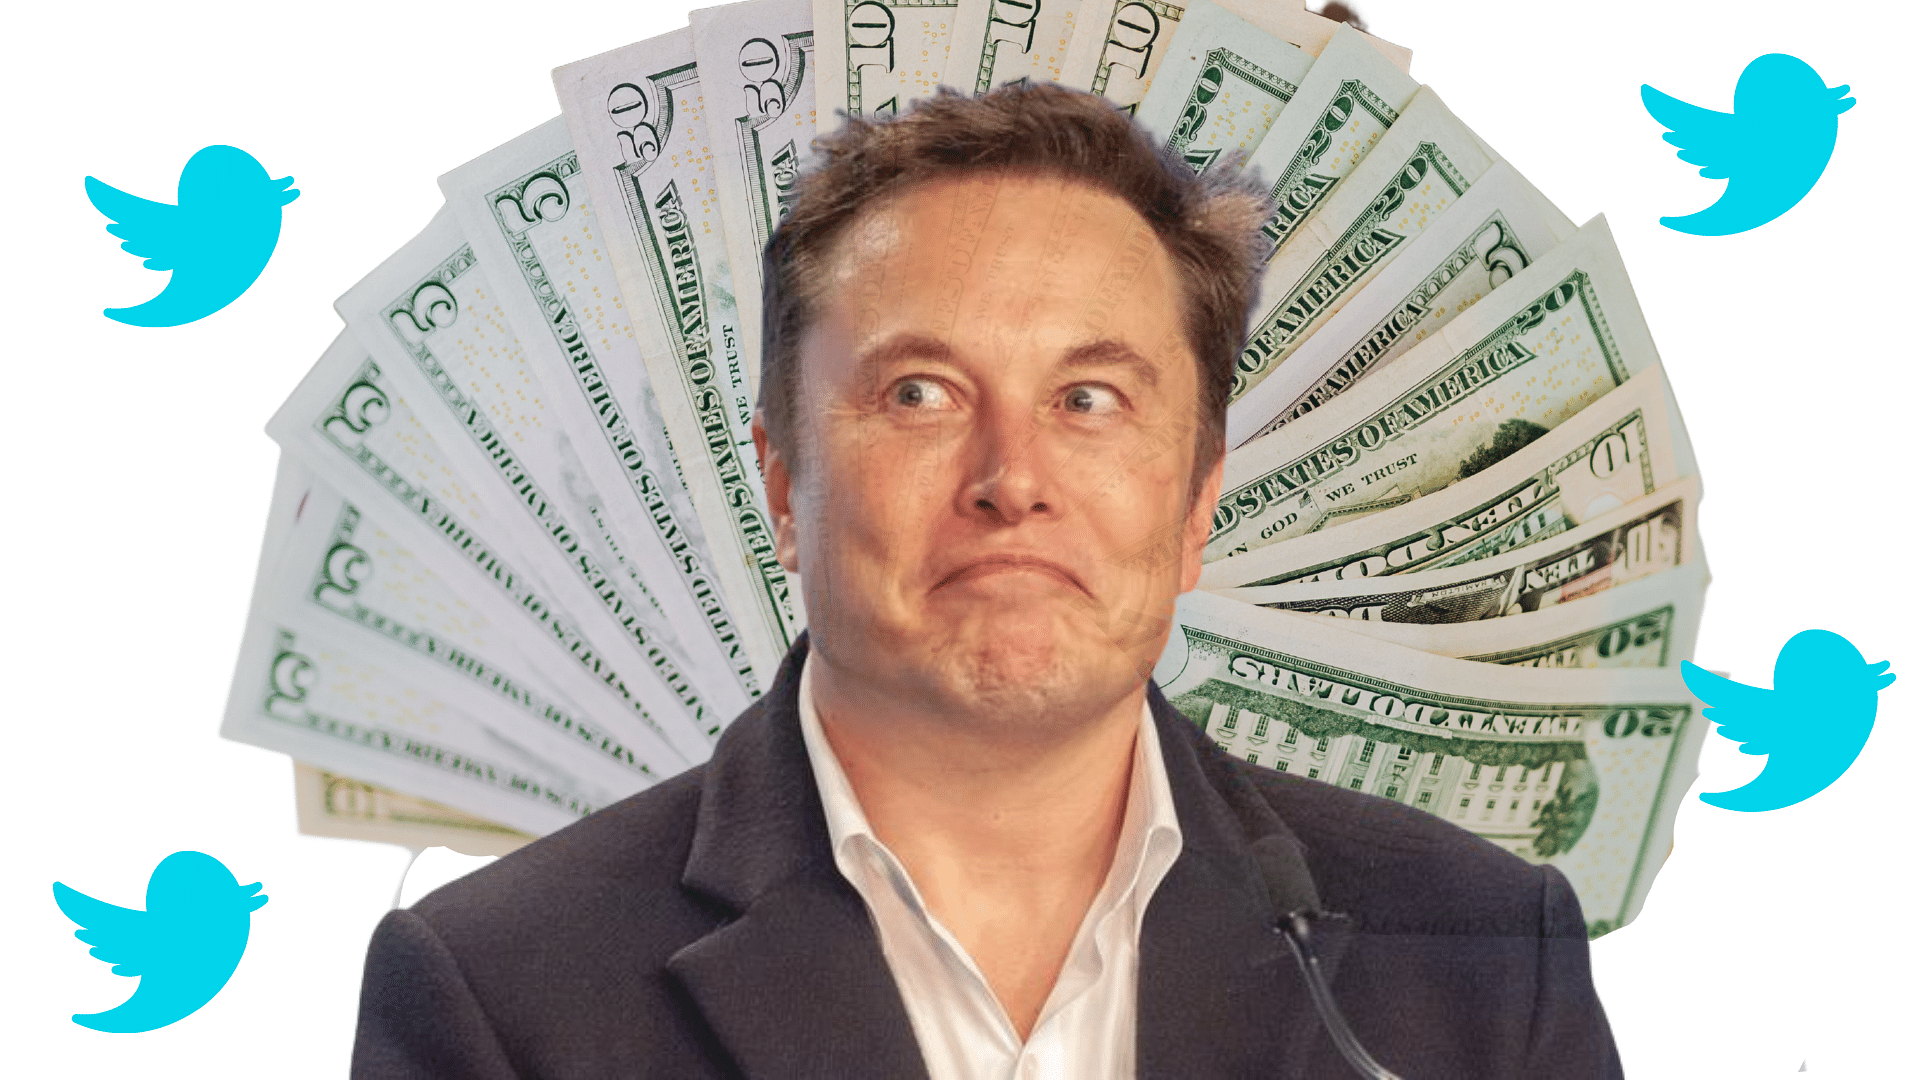 <div class="paragraphs"><p>A lawsuit has been filed against Tesla CEO Elon Musk by Twitter investors, accusing him of attempting to sketch a drop in the social networking company's stock price.</p><p><br></p></div>